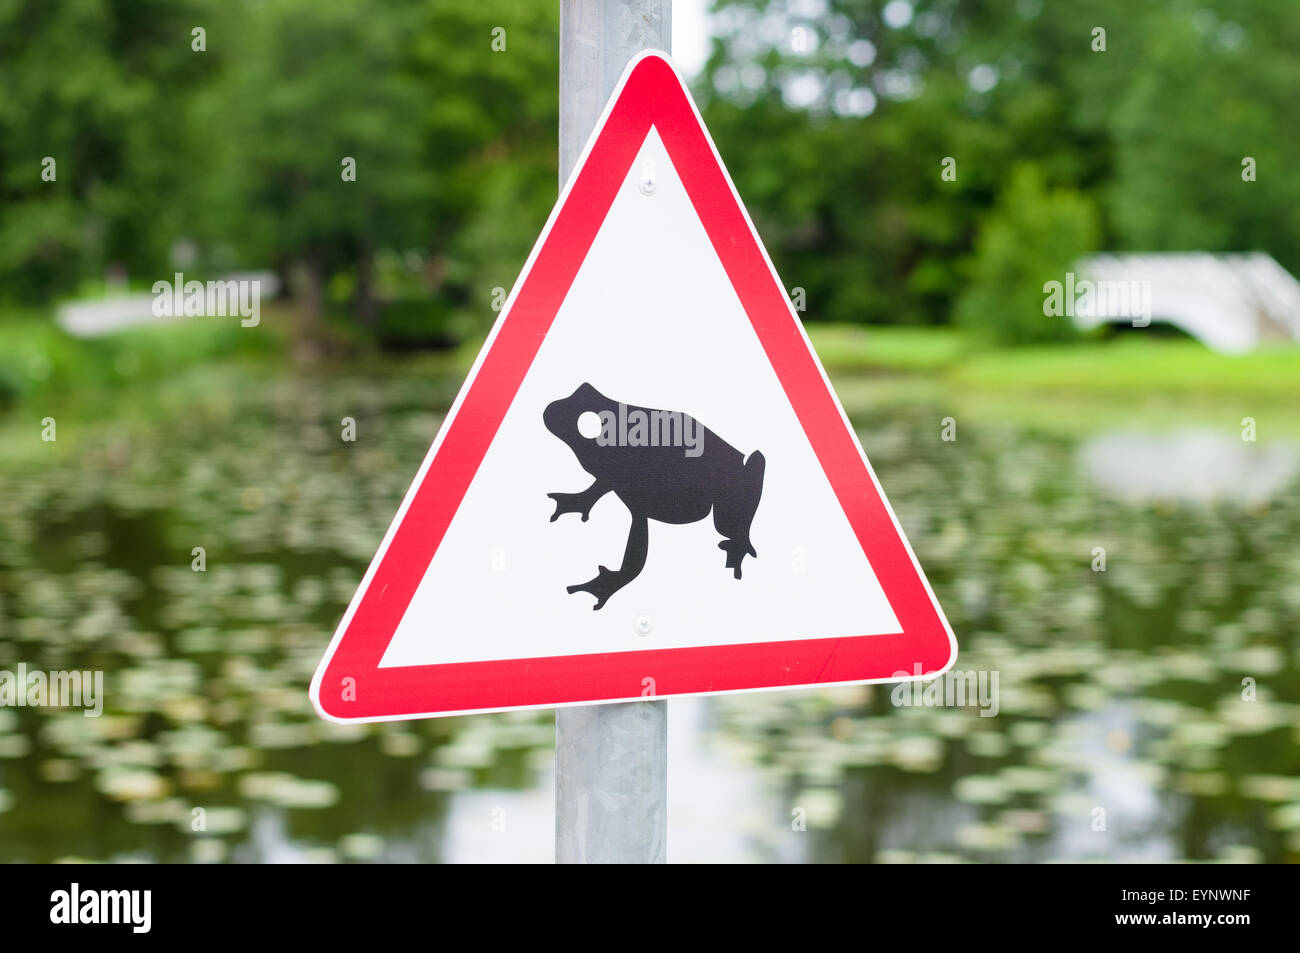 Traffic sign attends for frog migration, pond on background Stock Photo